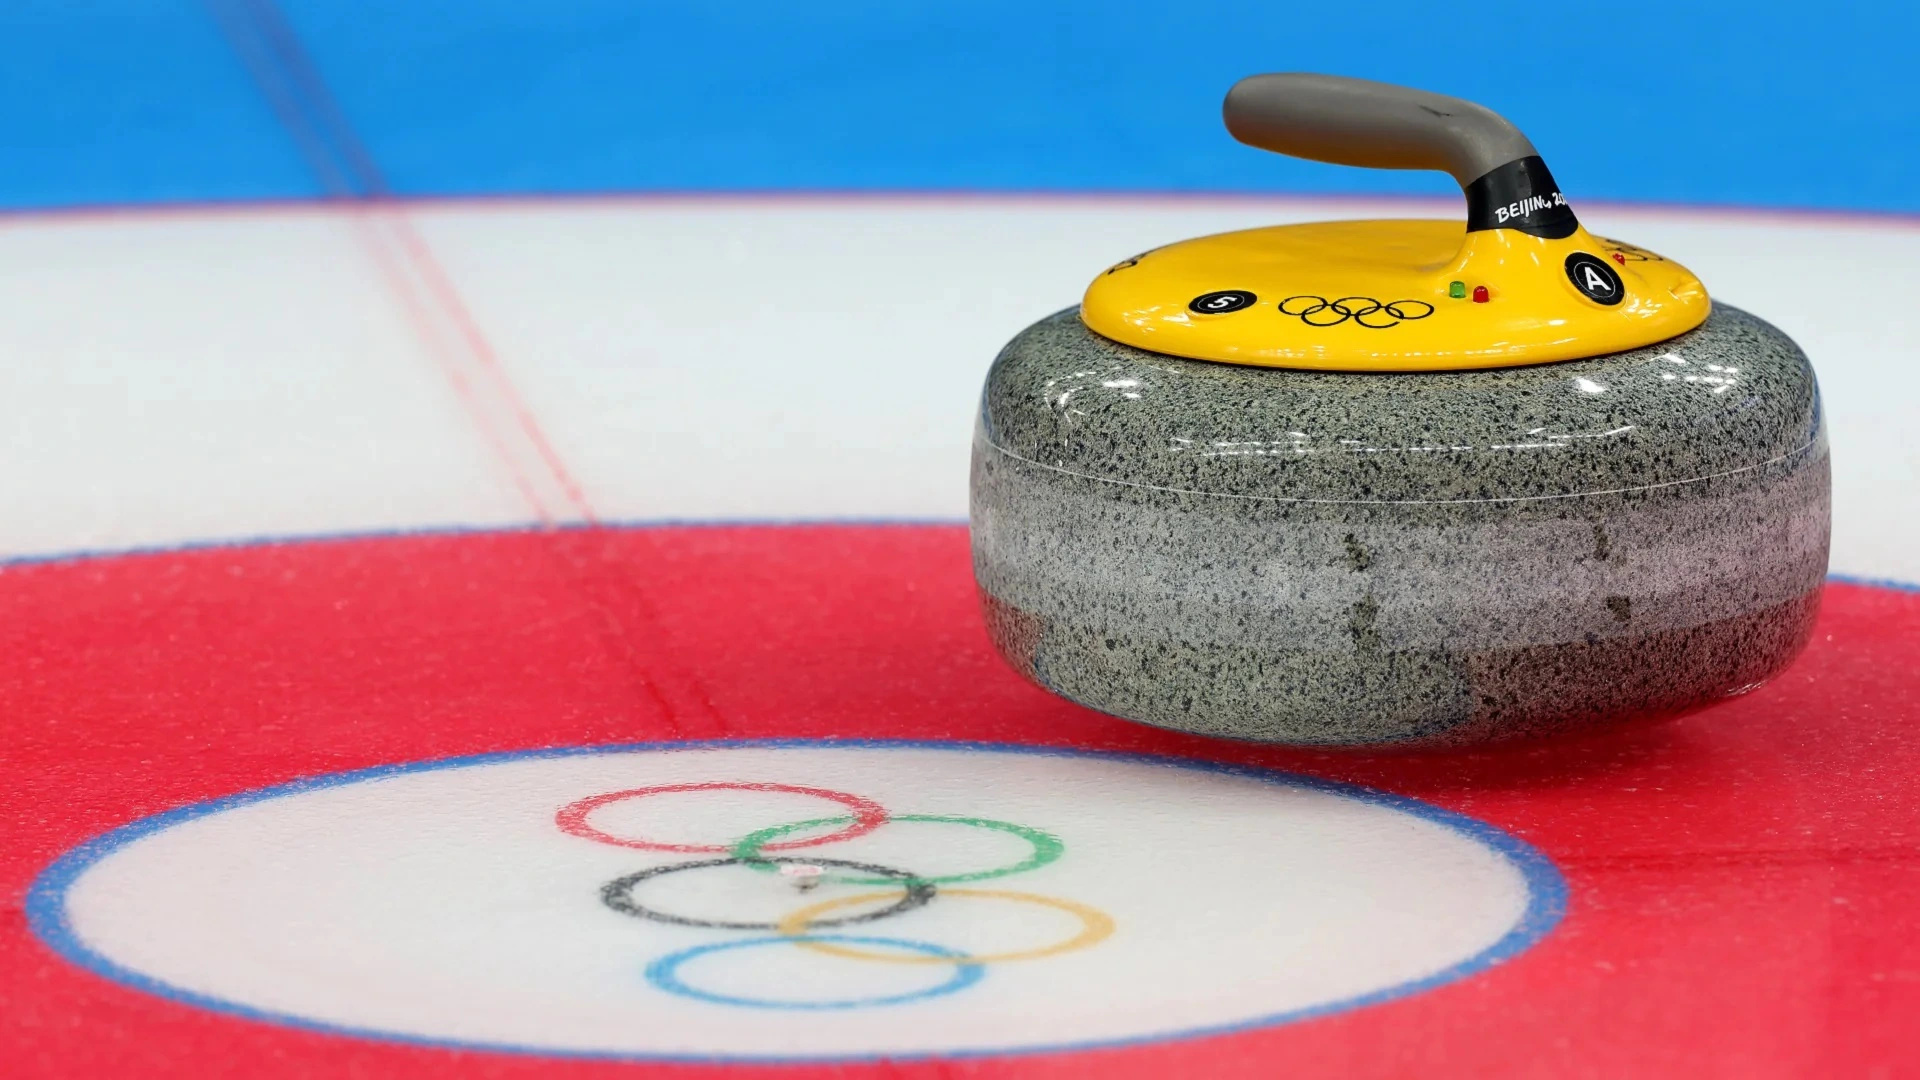 Curling questions answered, Understanding curling, Sports Q&A, Curling knowledge, 1920x1080 Full HD Desktop